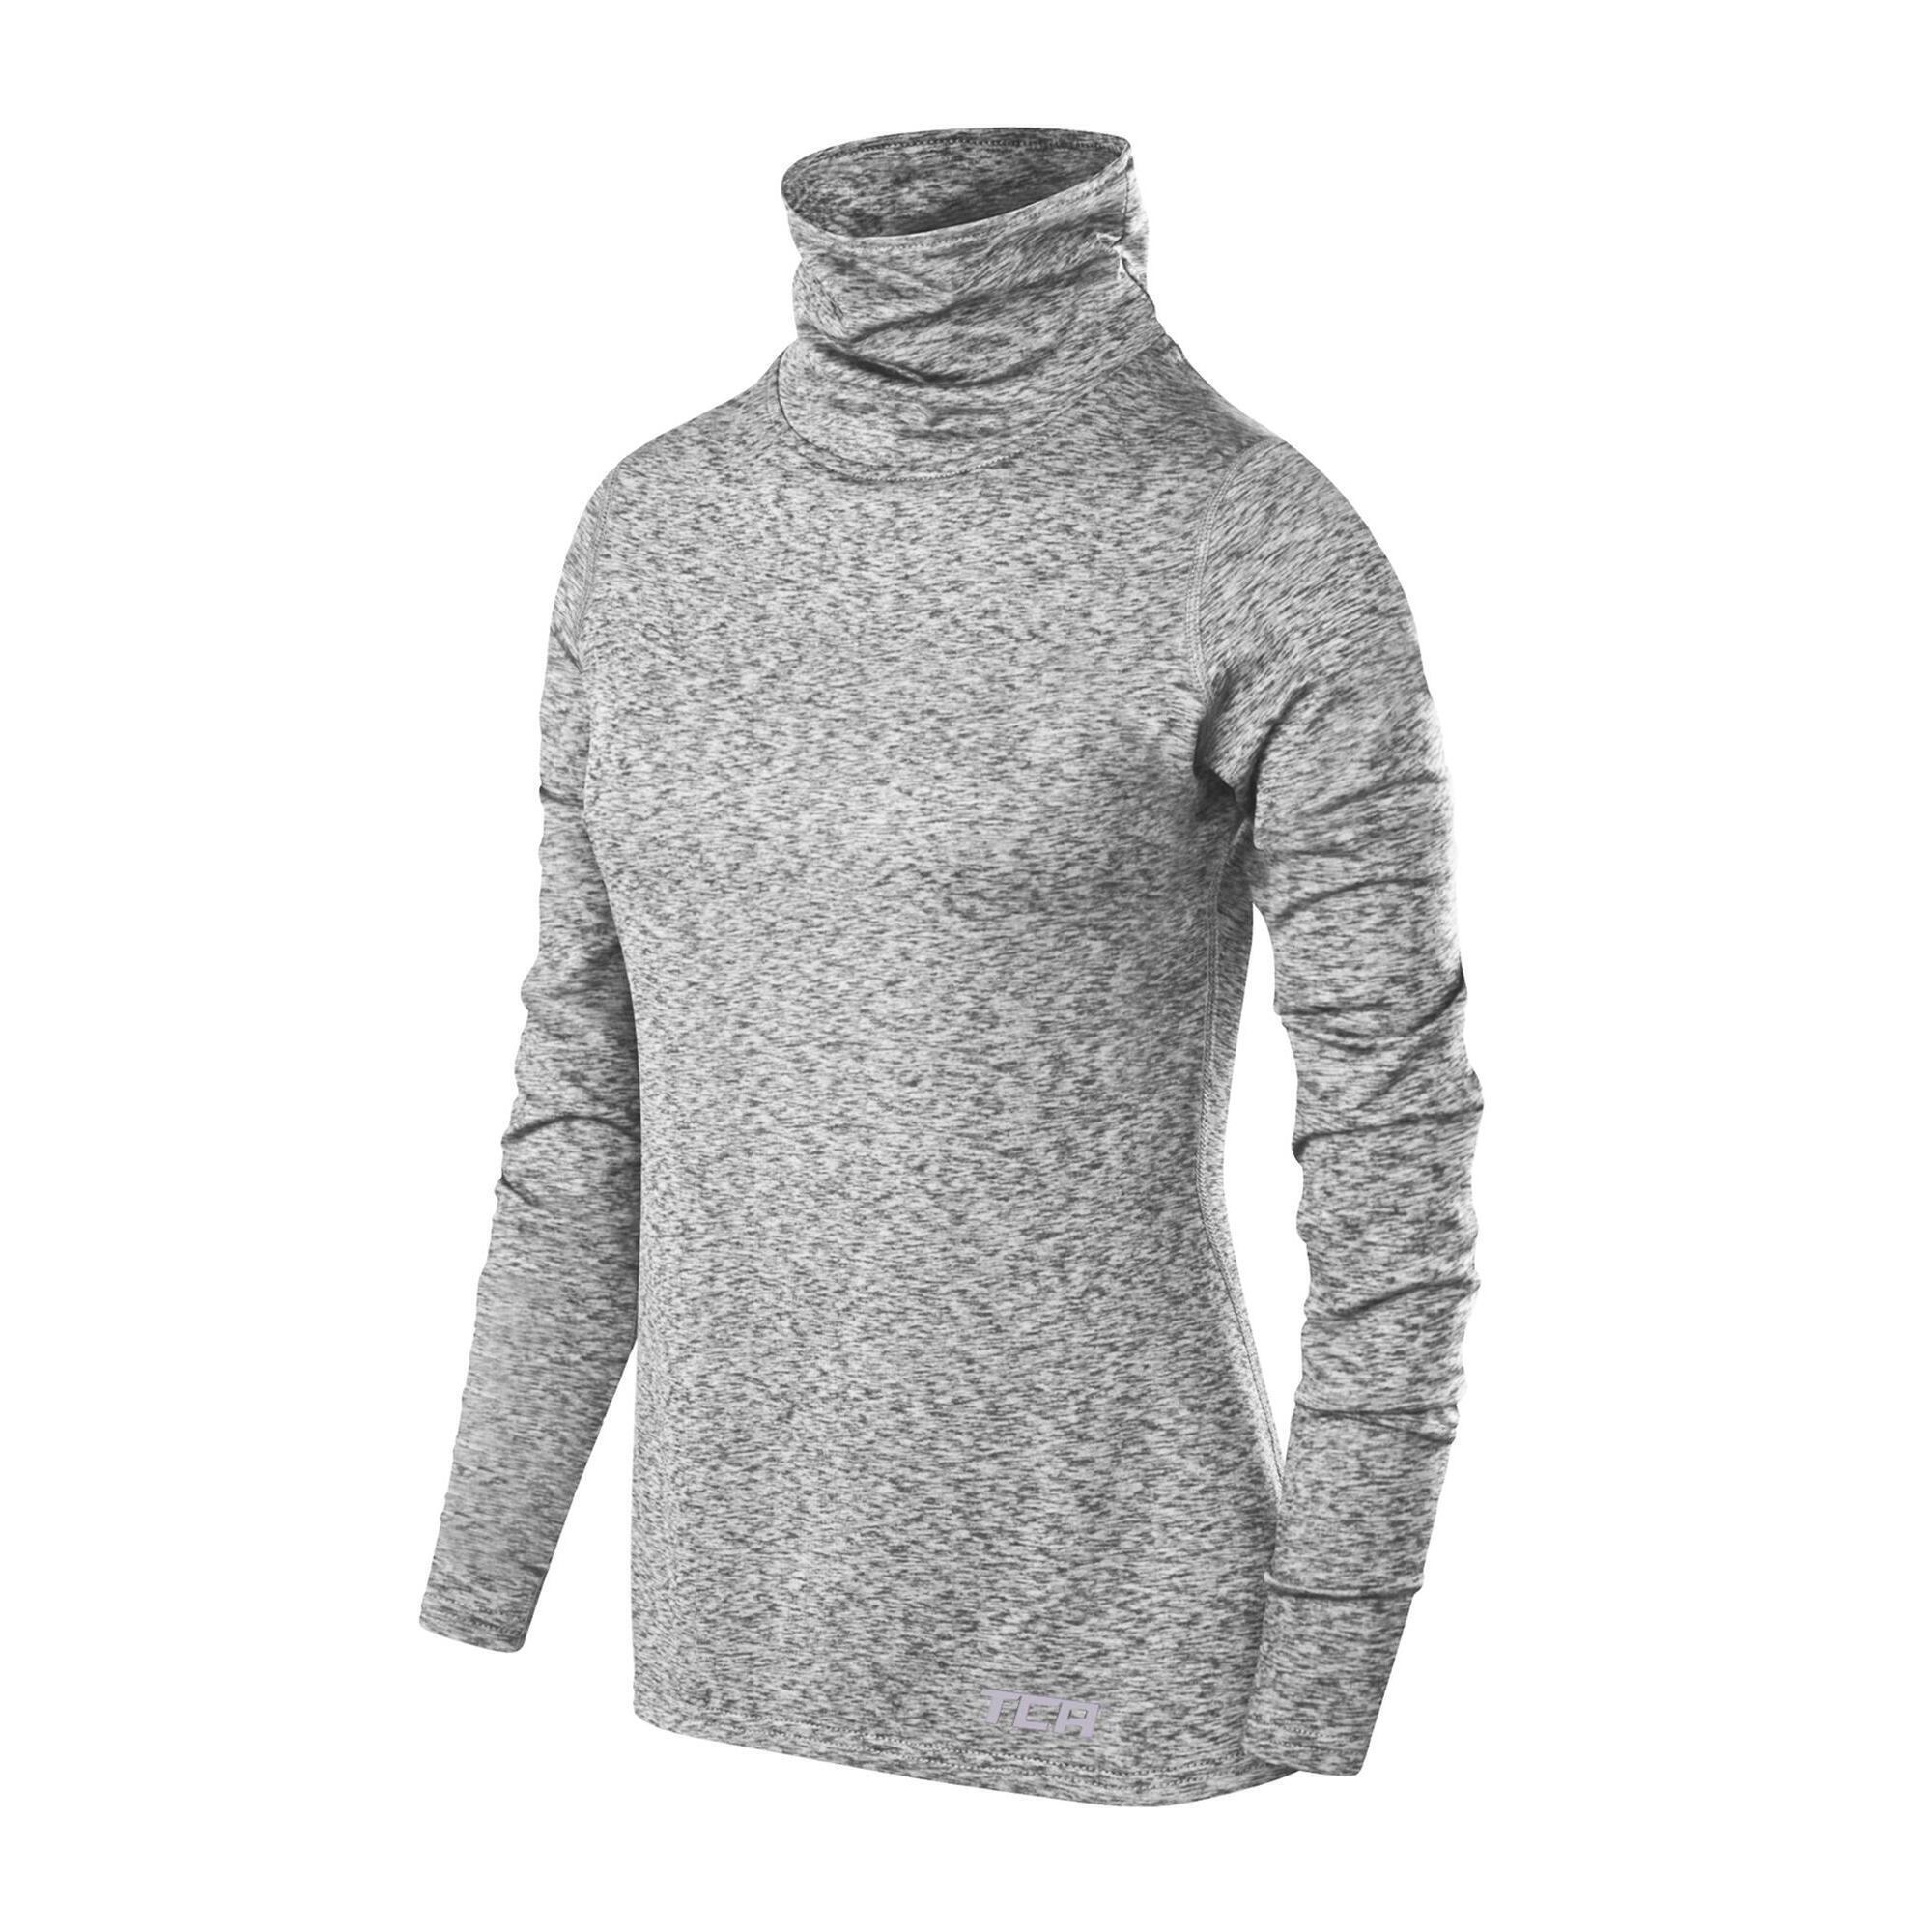 TCA Girls' Thermal Funnel Neck Top - Quiet Shade Marl